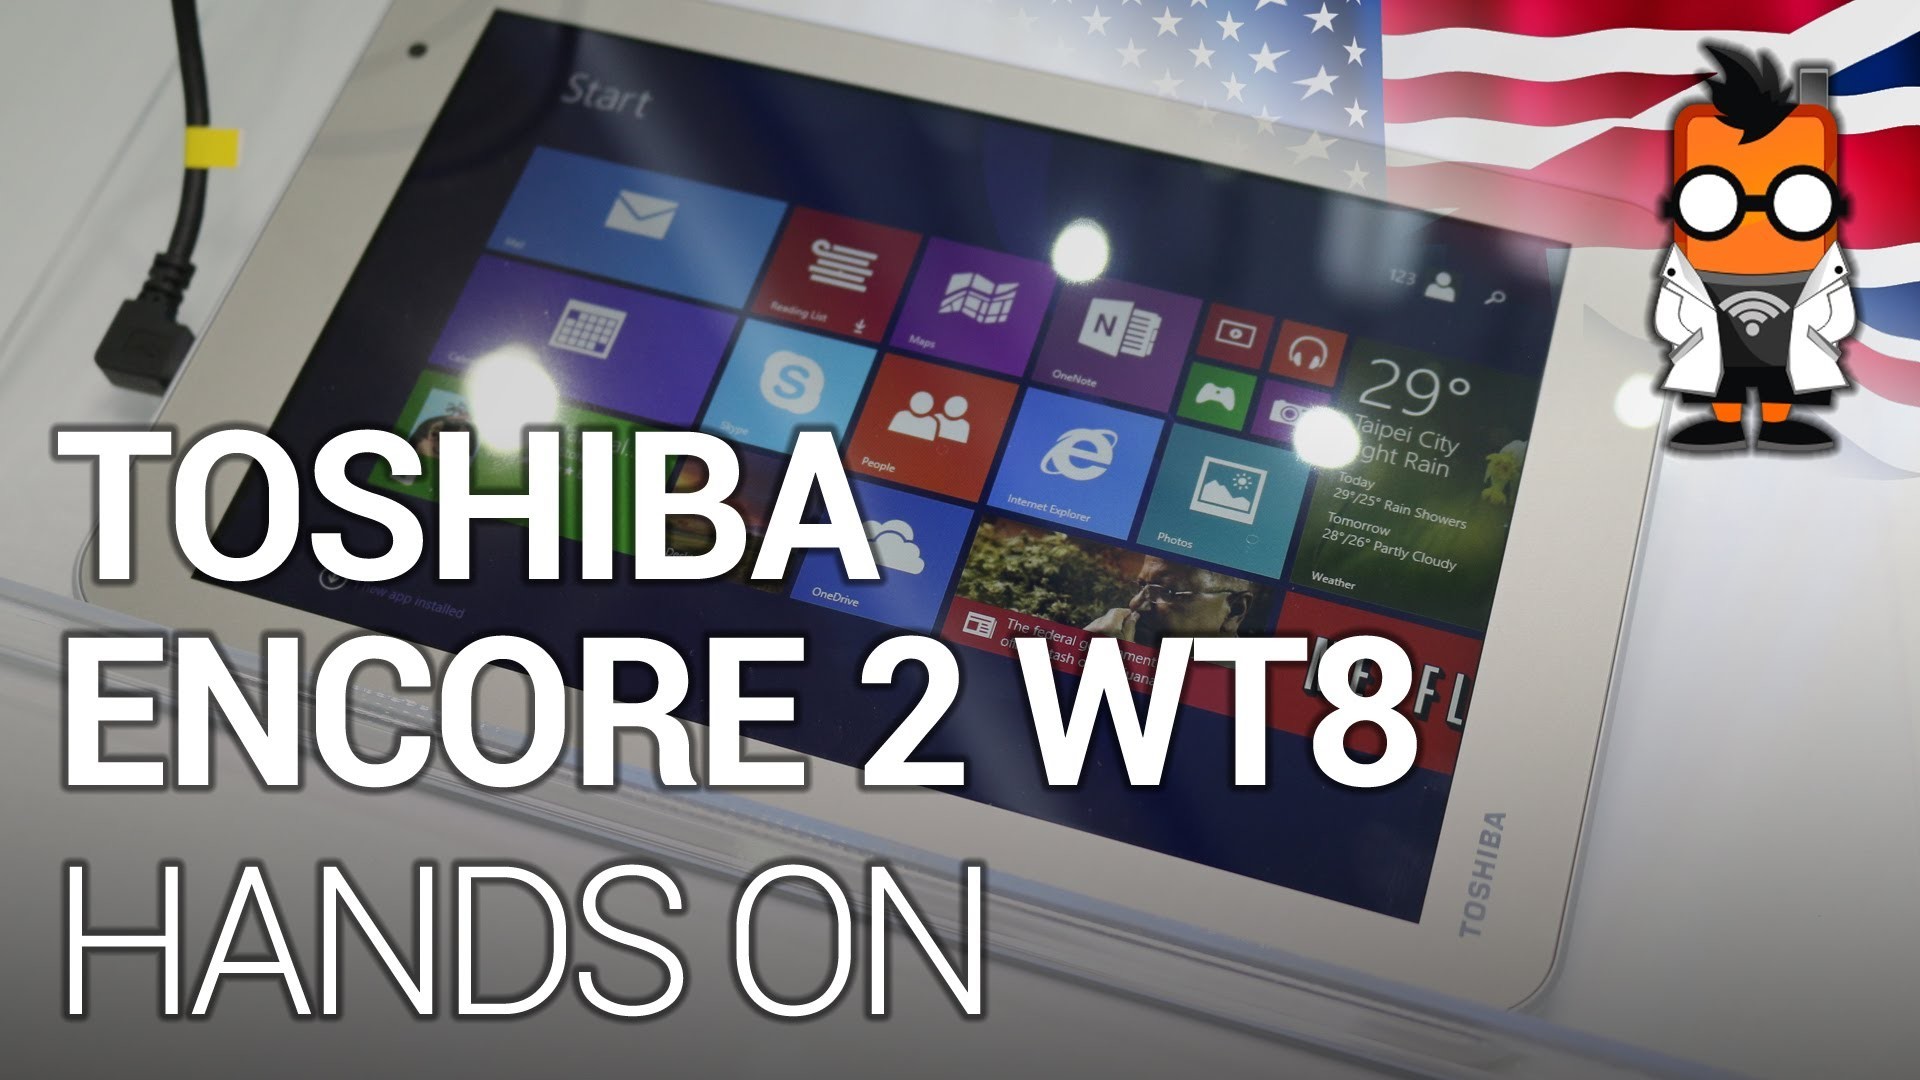 1920x1080 Toshiba Encore 2 WT8 Windows 8.1 Tablet: Hands On [ENG]